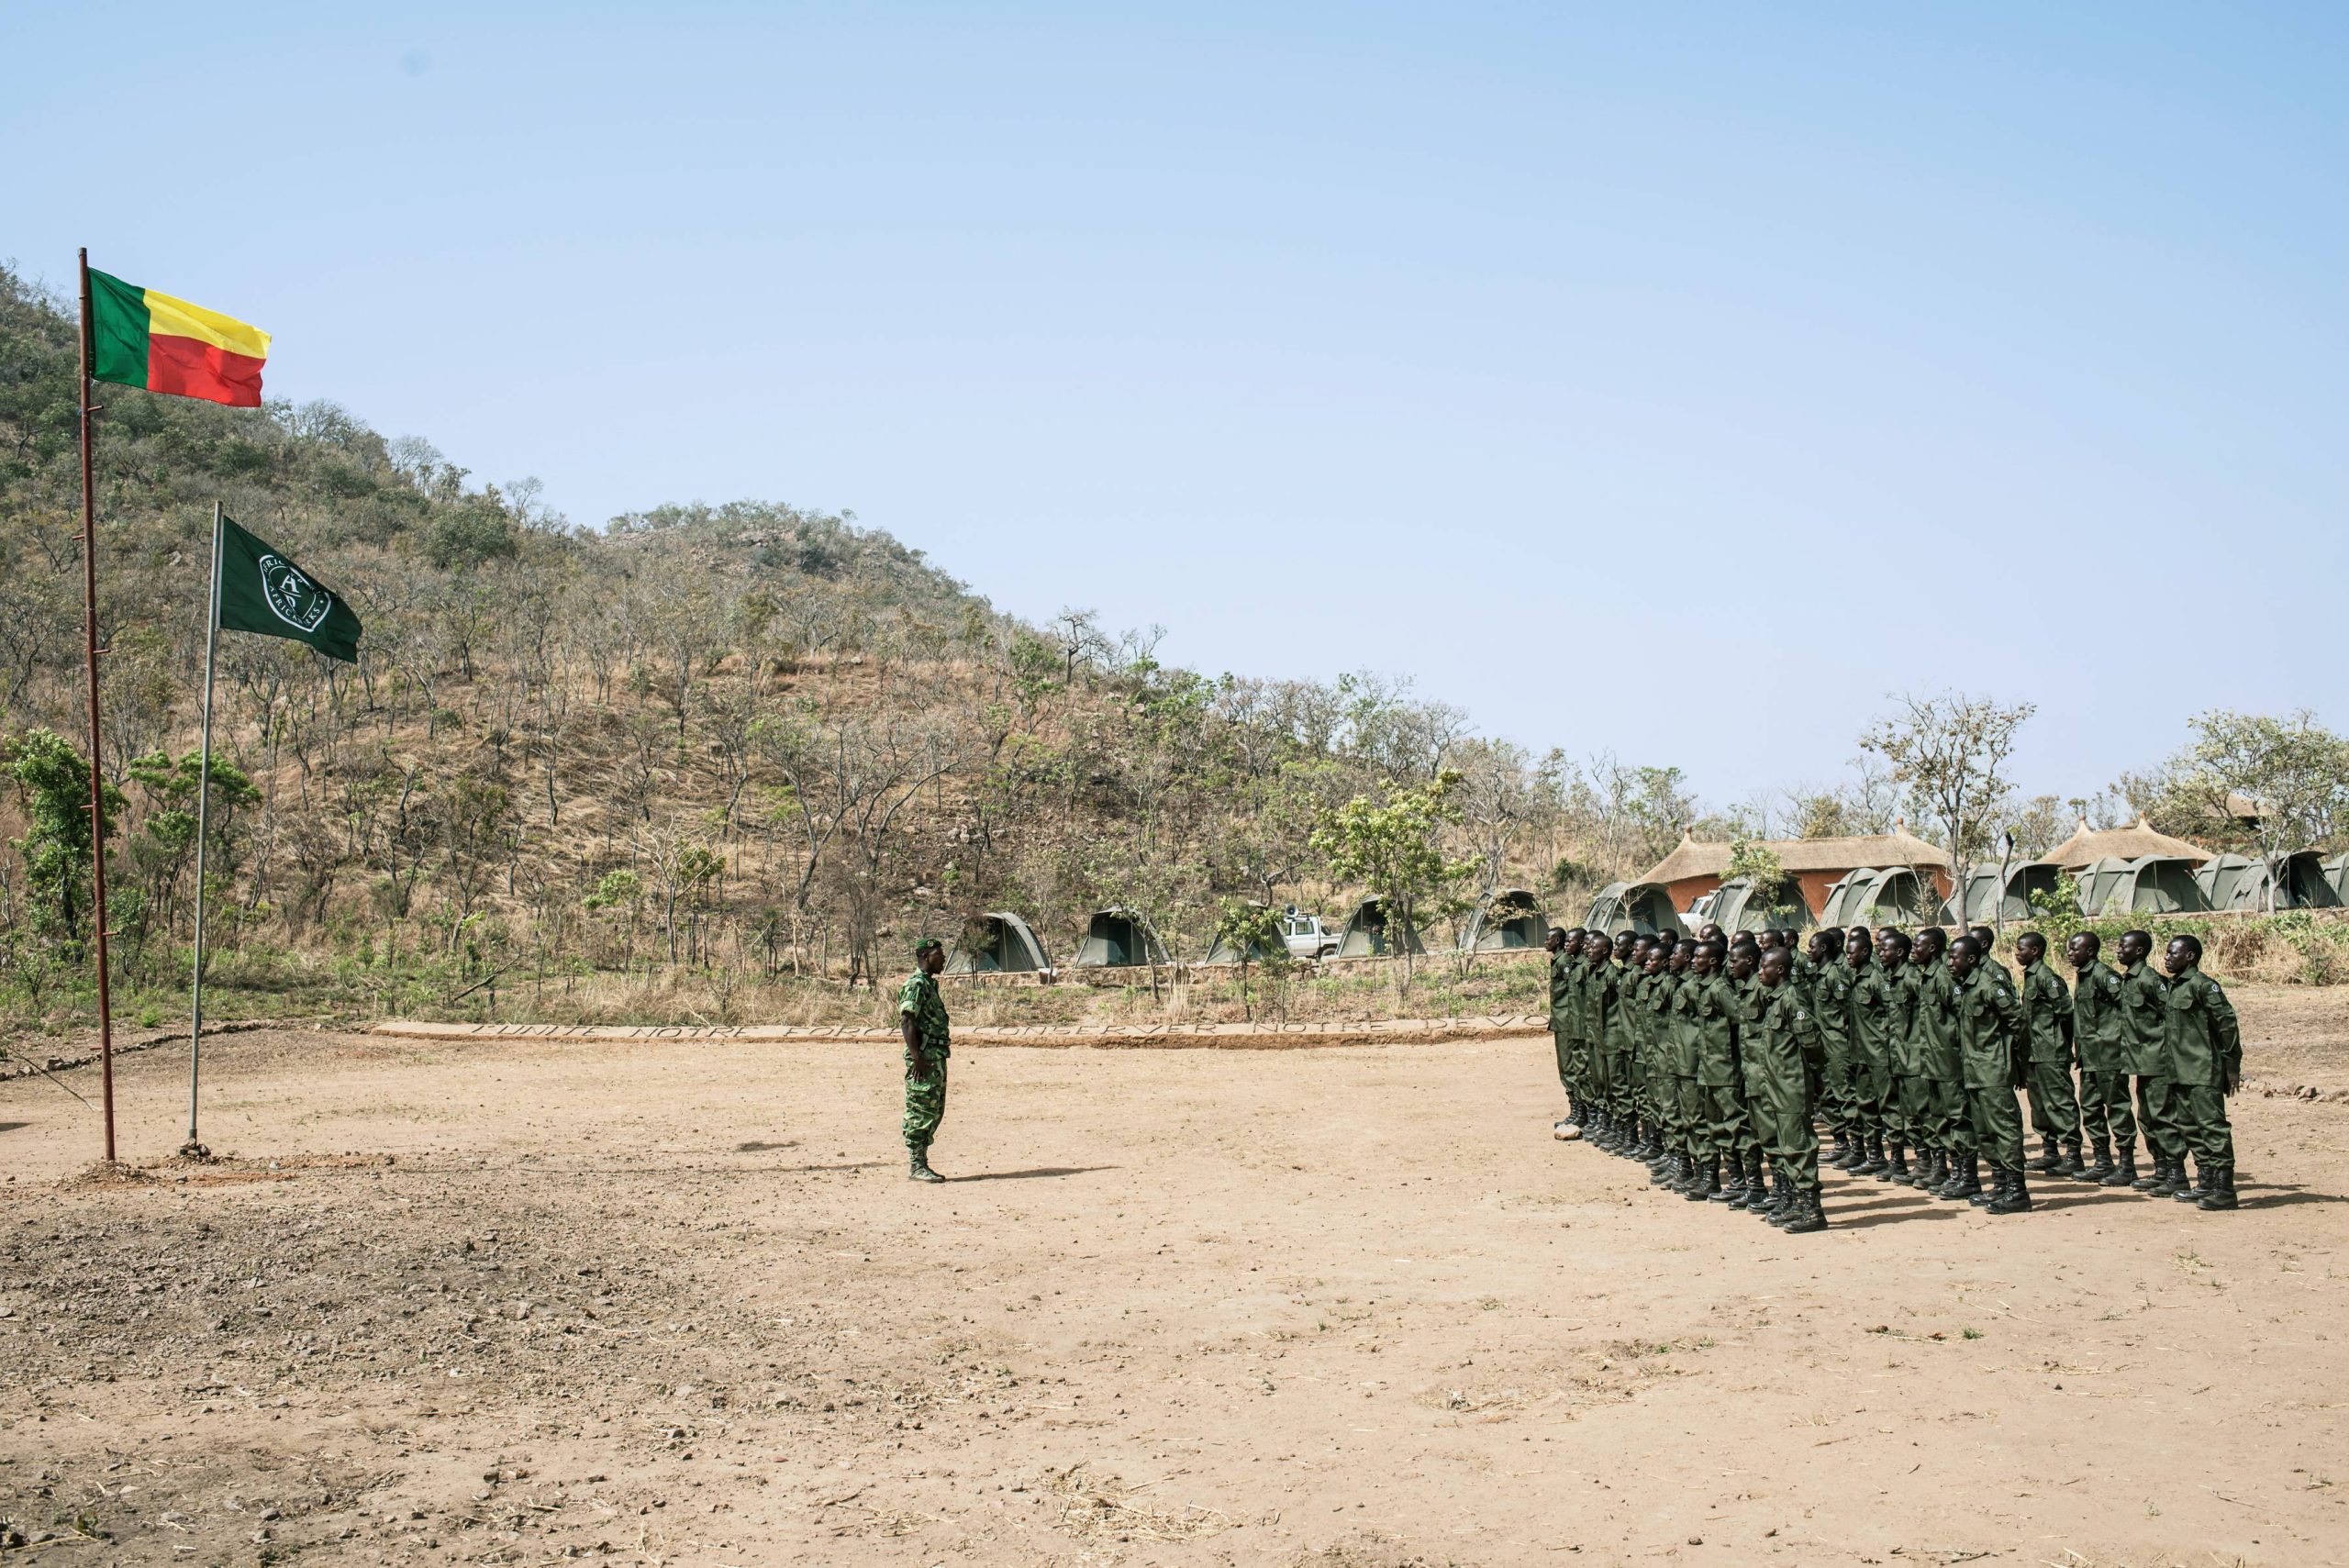 Security forces stand at attention during a graduation ceremony in northern Benin.